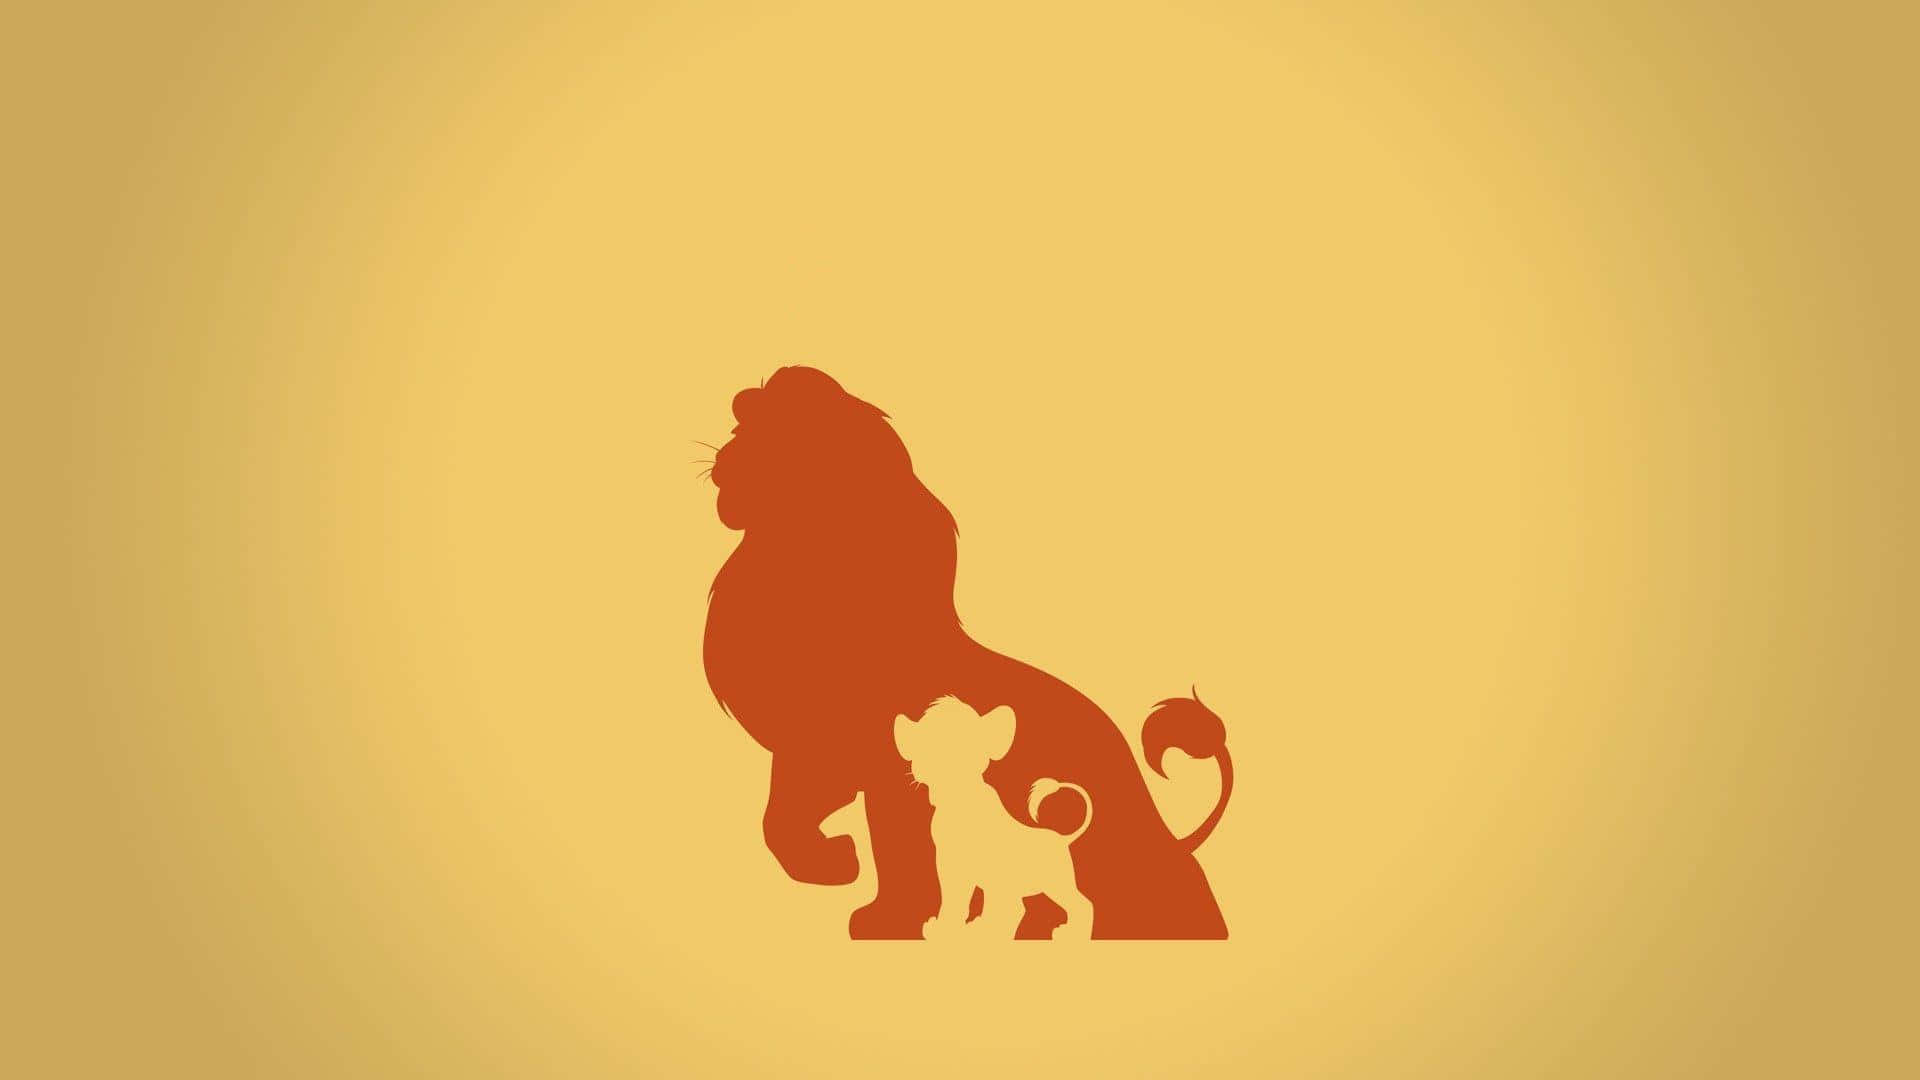 Lion King Silhouette Art Background